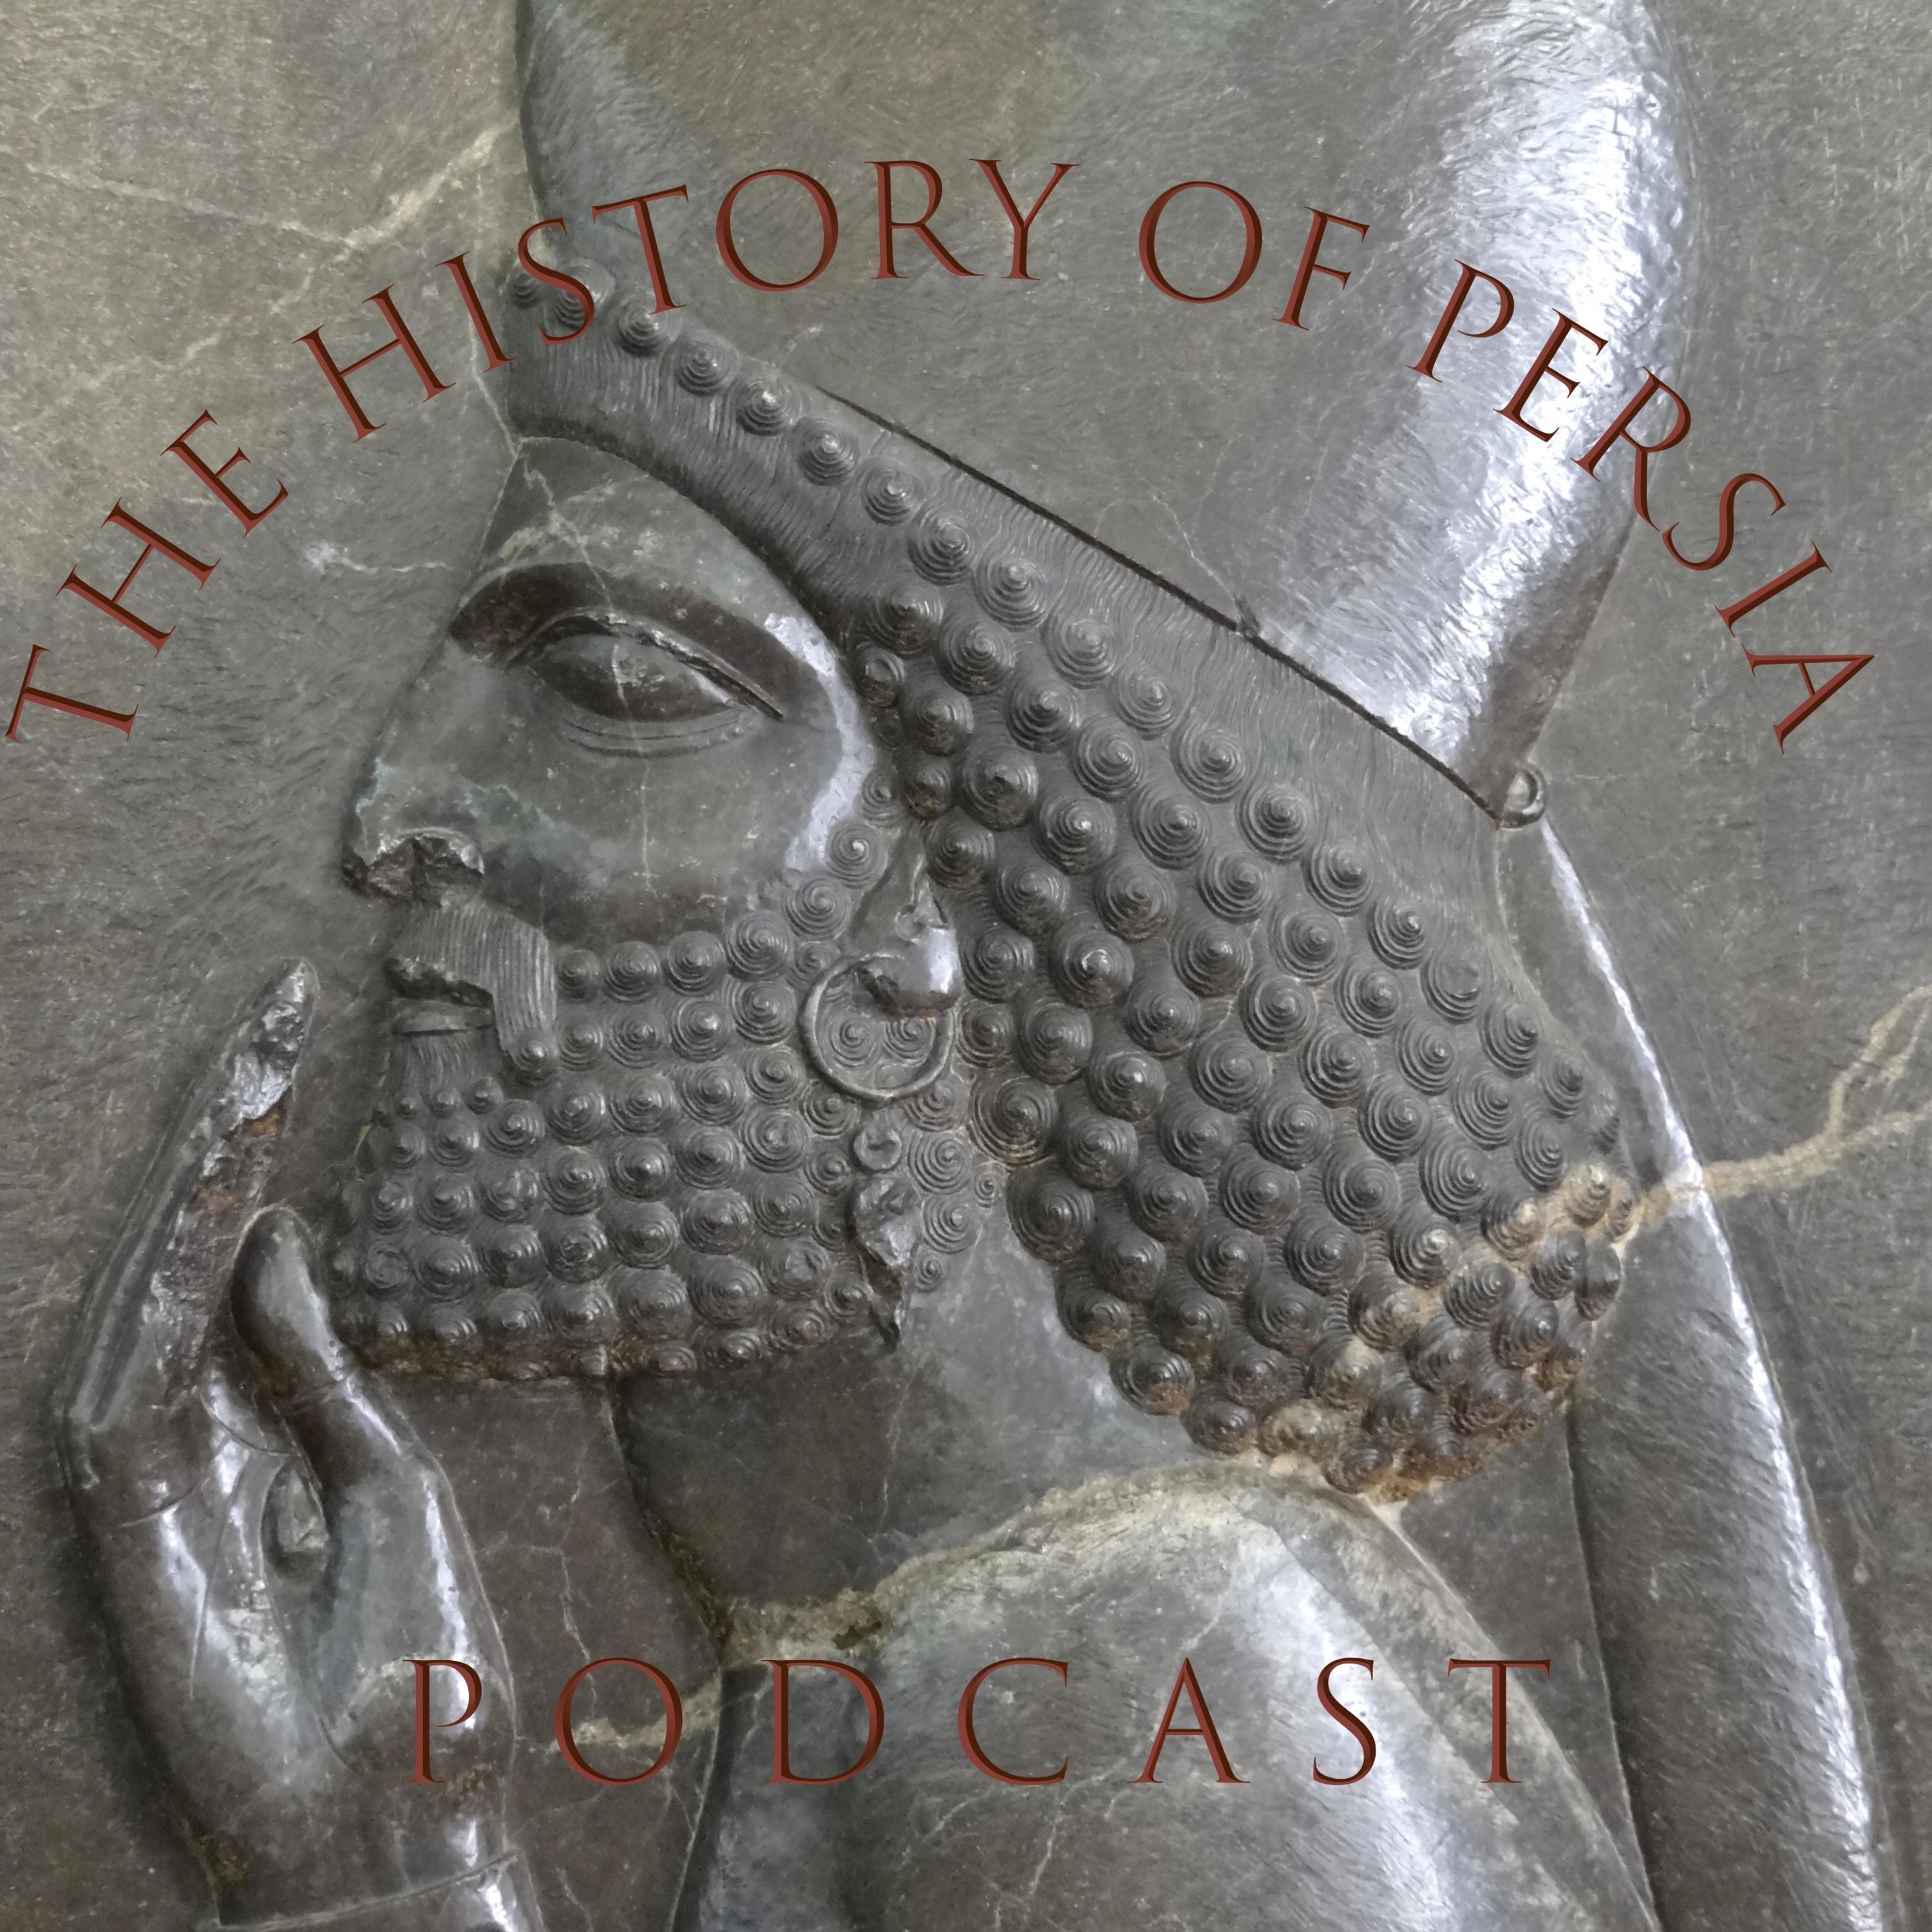 History of Persia